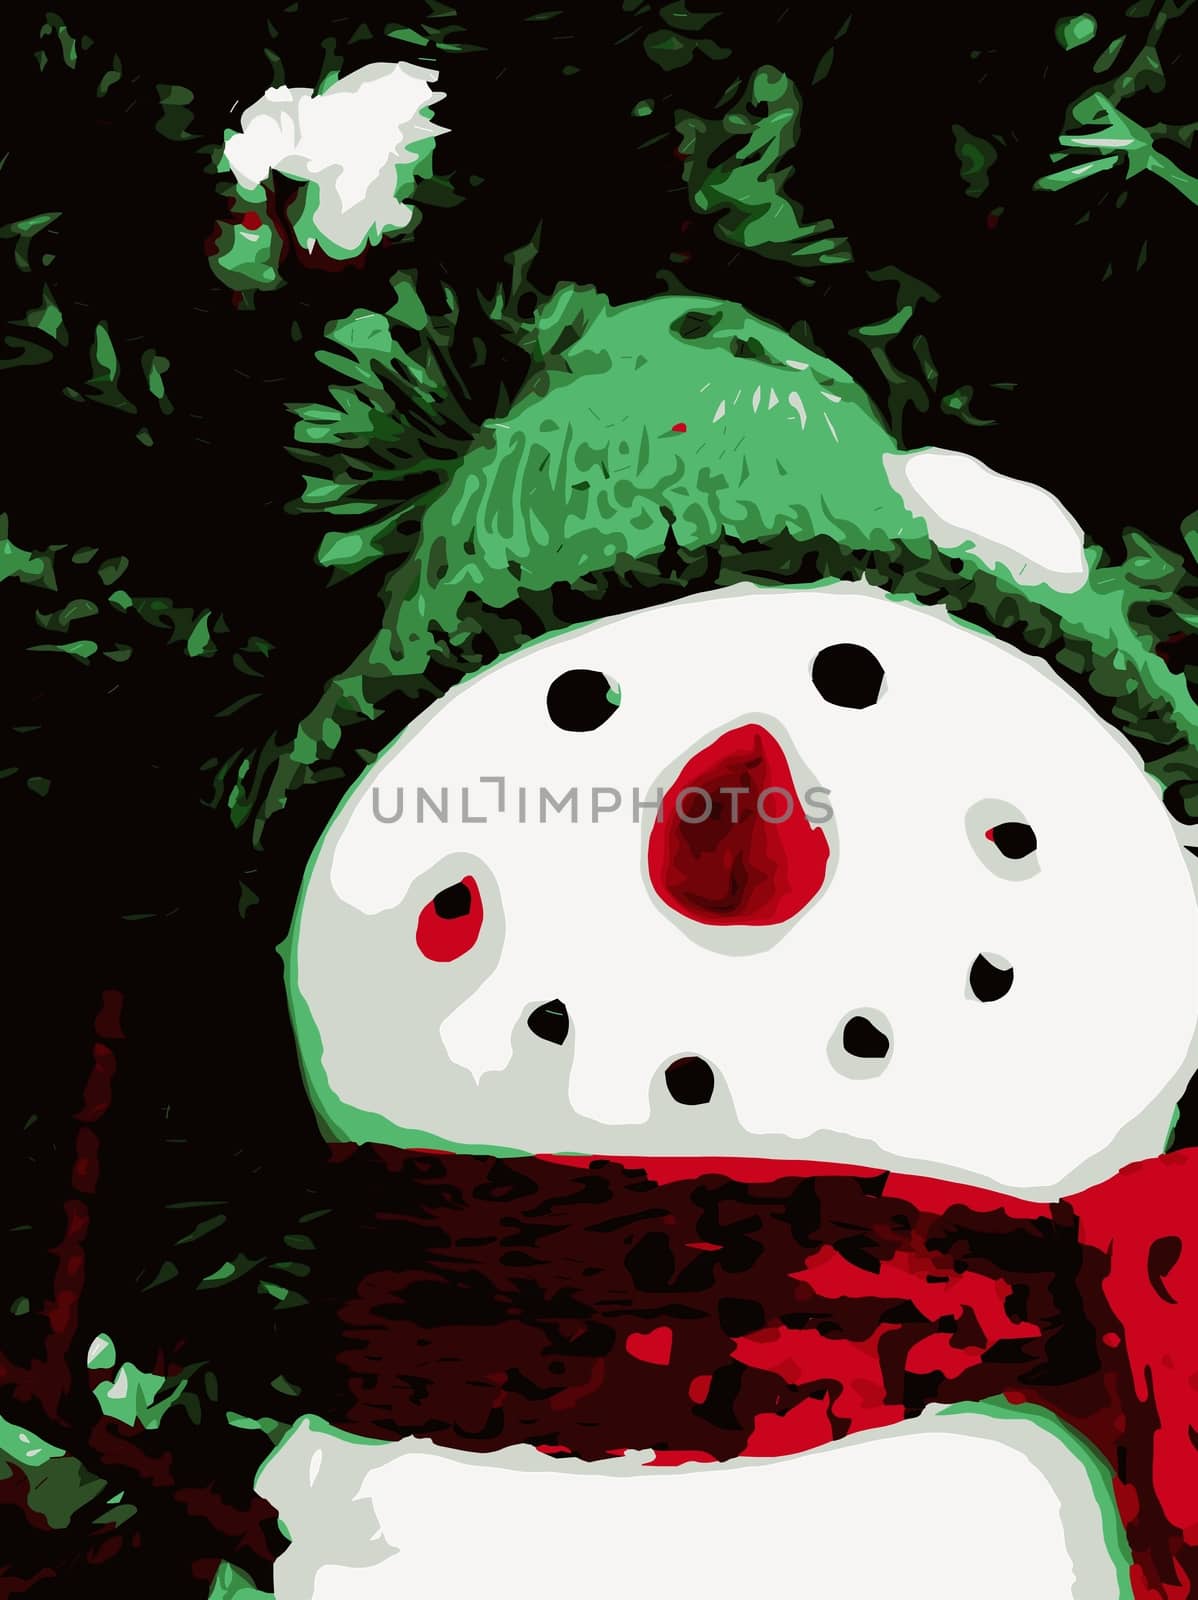 snowman doll with christmas tree background by Timmi